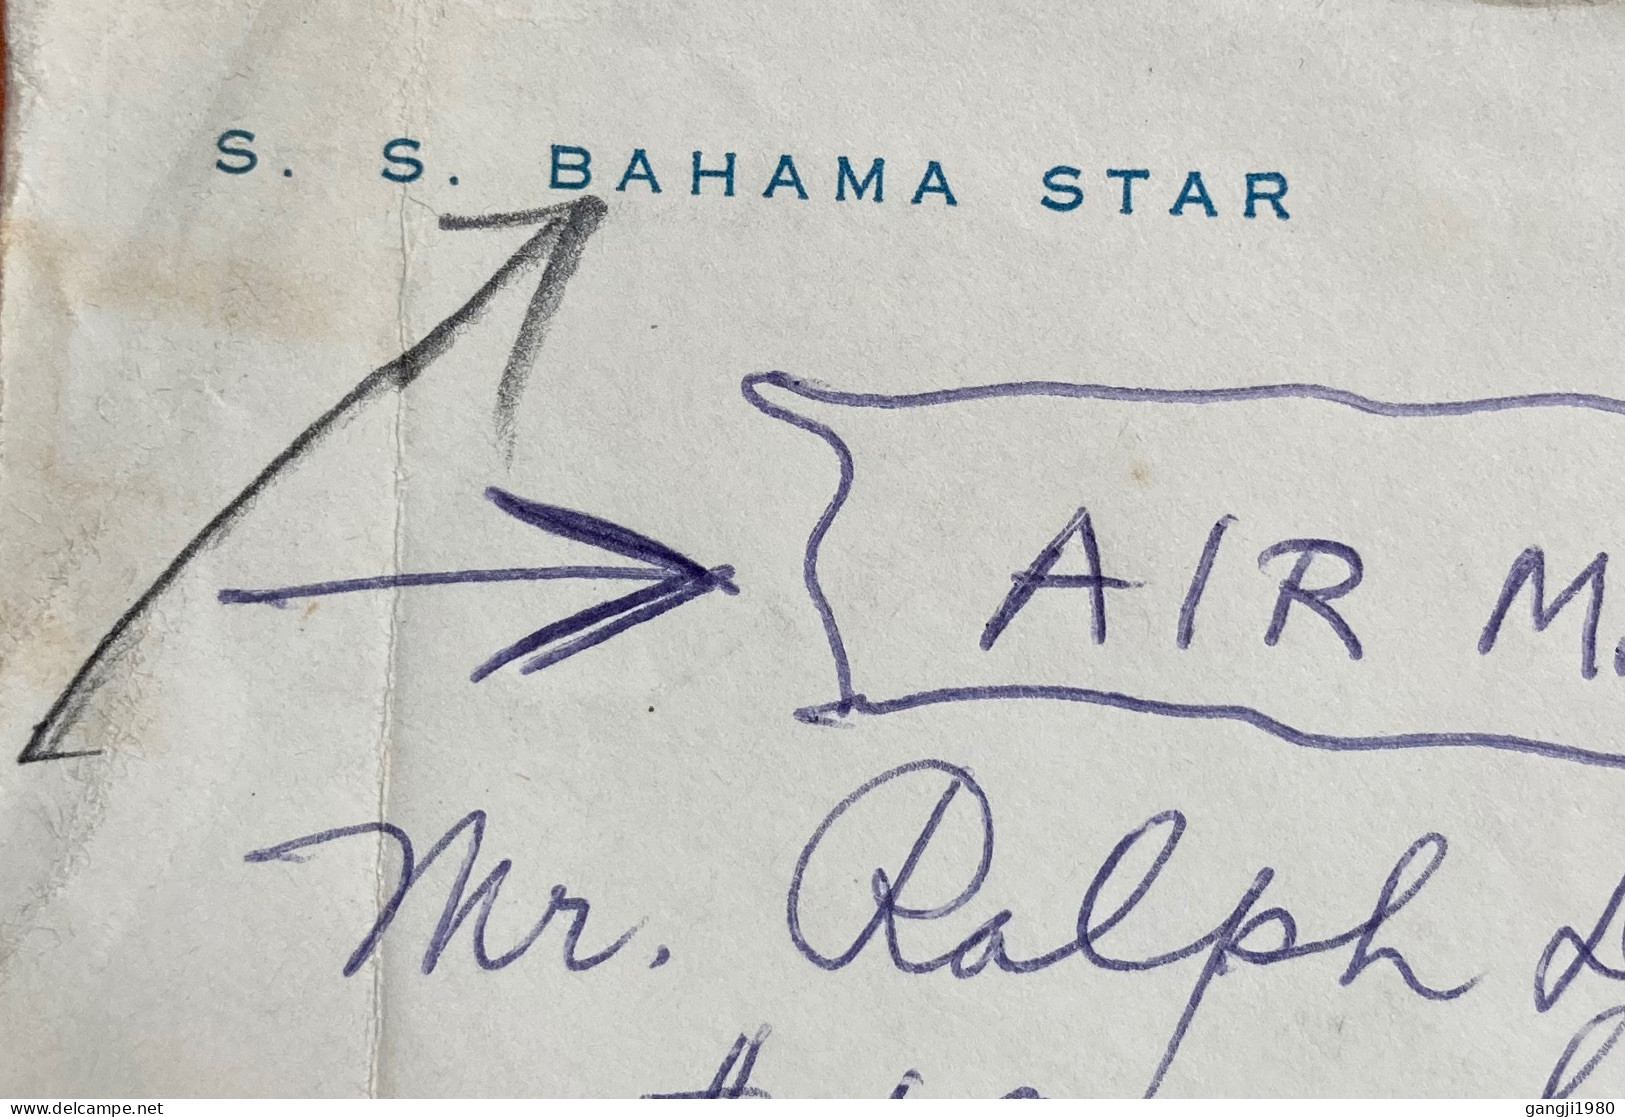 BAHAMAS 1964, SS. BAHAMA STAR. PRIVATE COVER USED TO USA, PARADISE BEACH & QUEEN STAMP, NASSAU CITY WAVY CANCEL - 1963-1973 Autonomie Interne